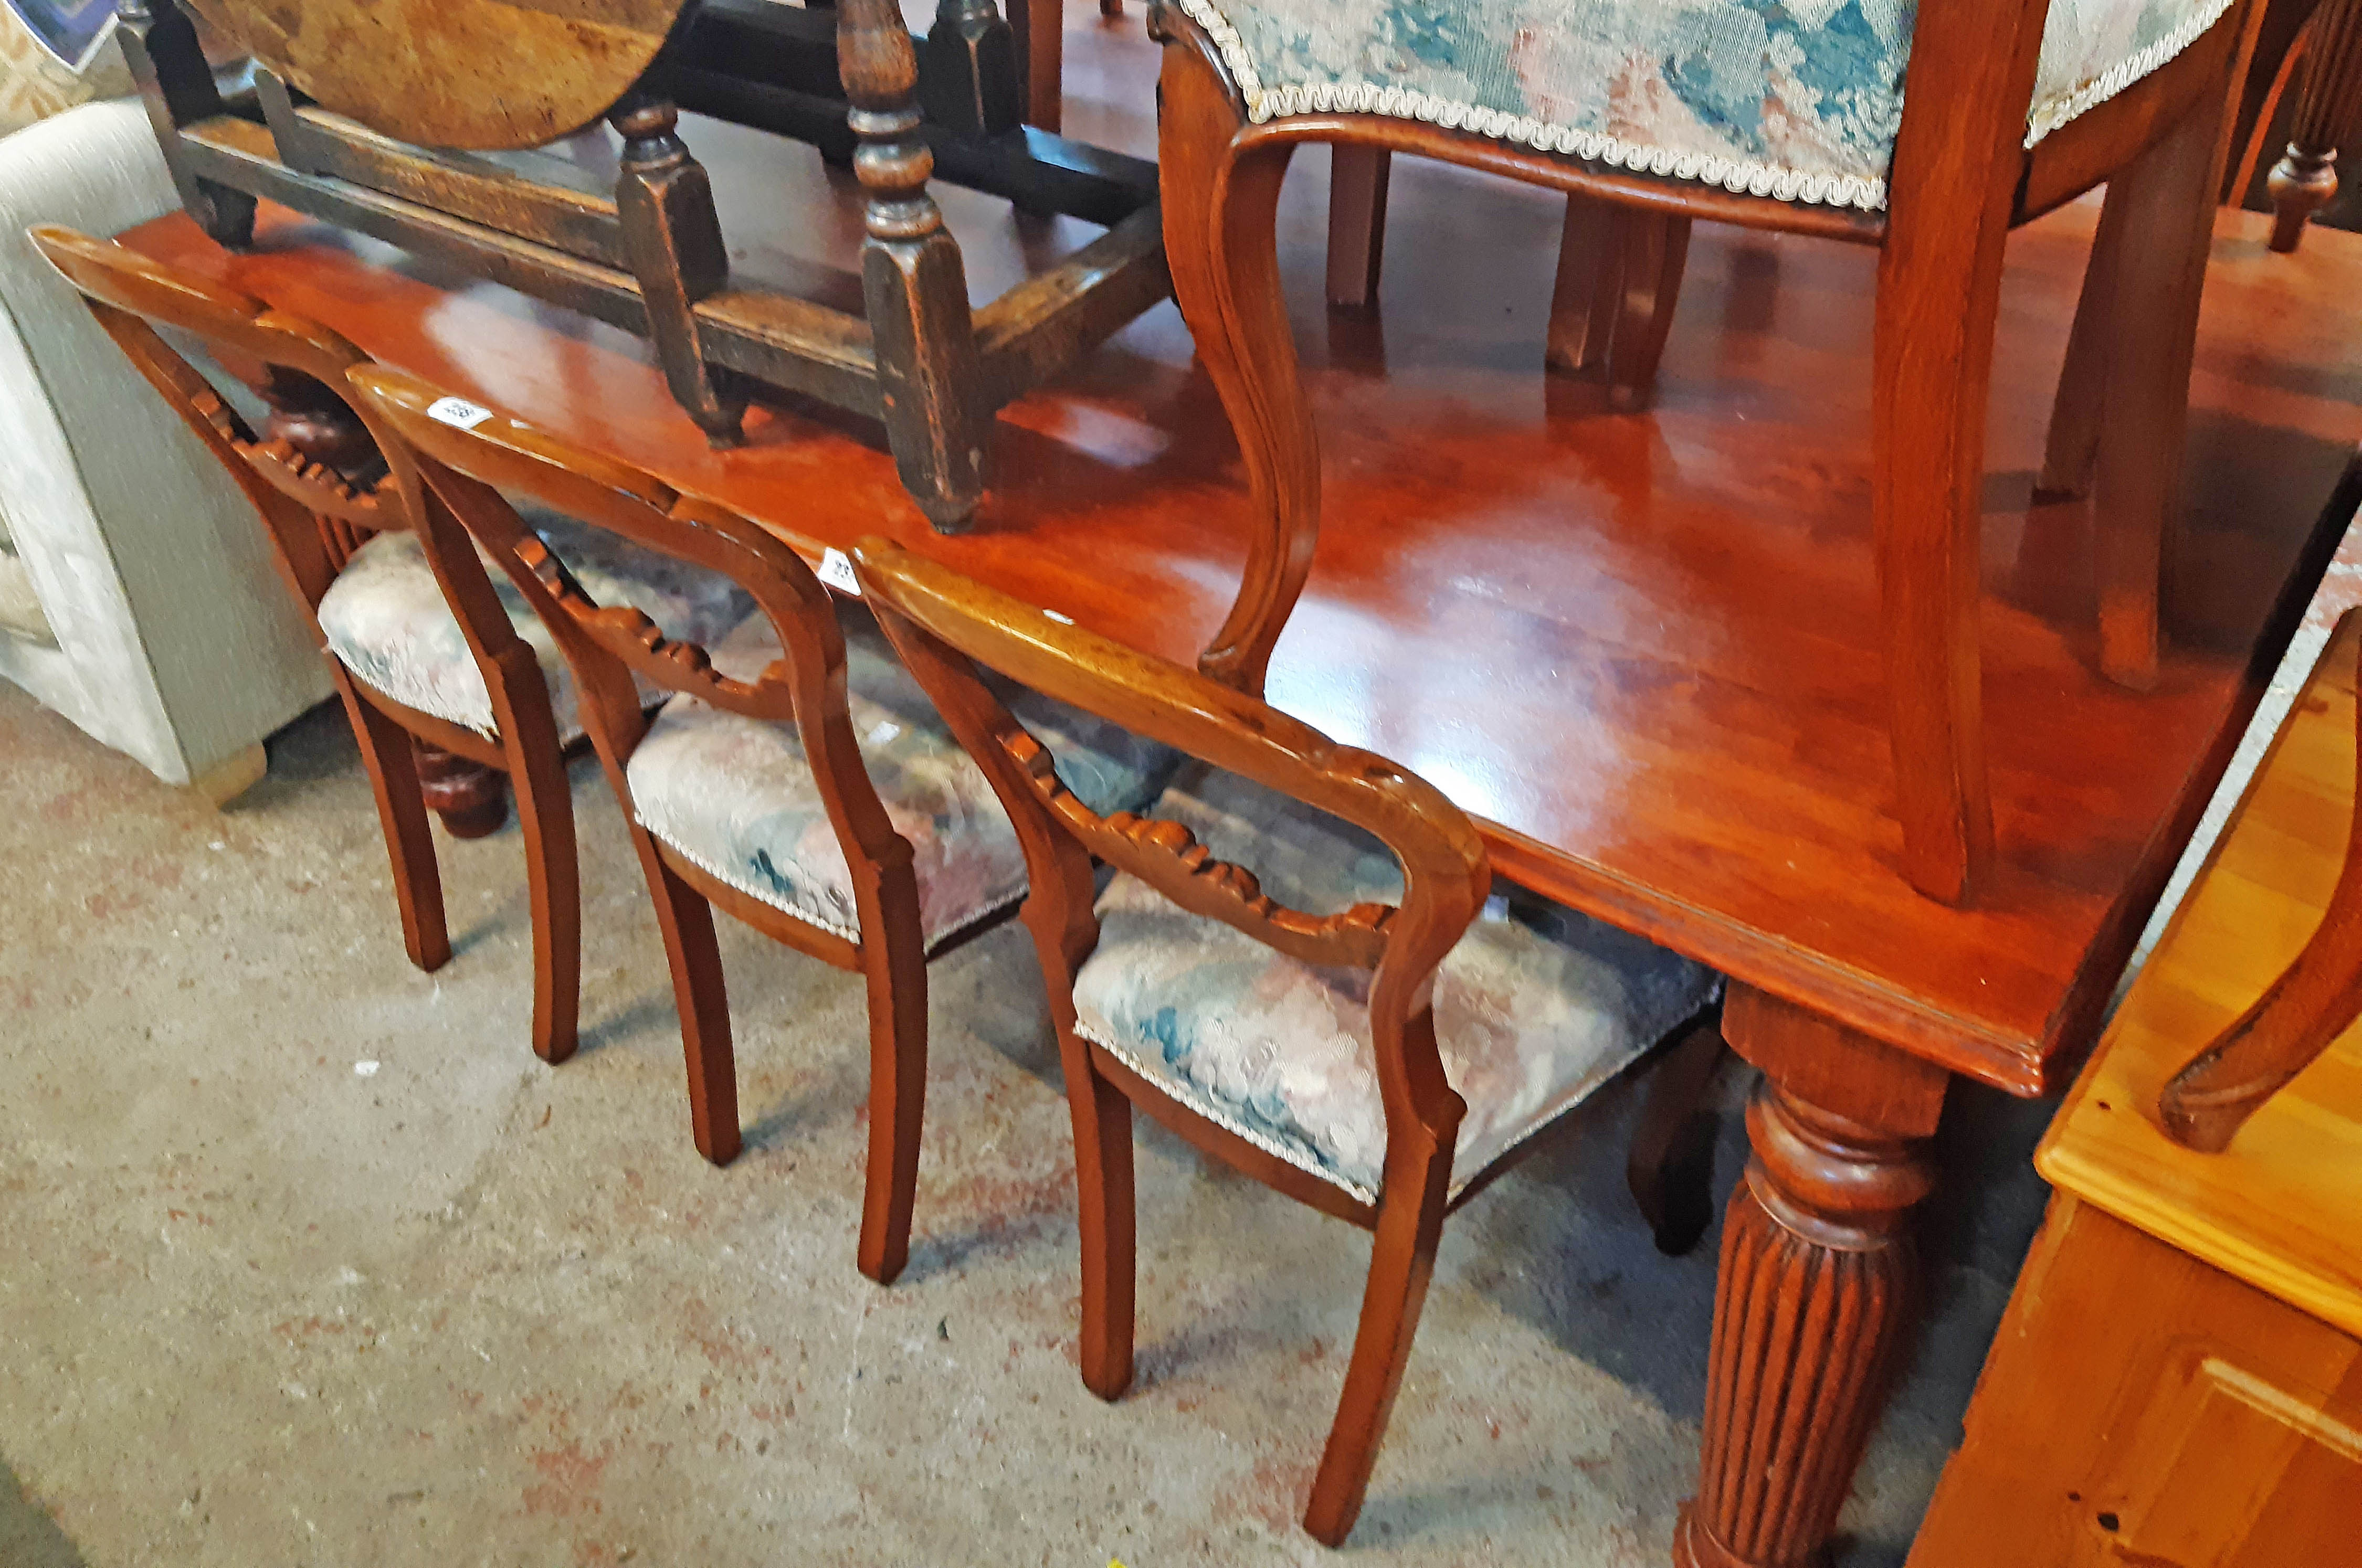 A 6' reproduction mahogany dining table with moulded top, set on heavy turned and reeded legs